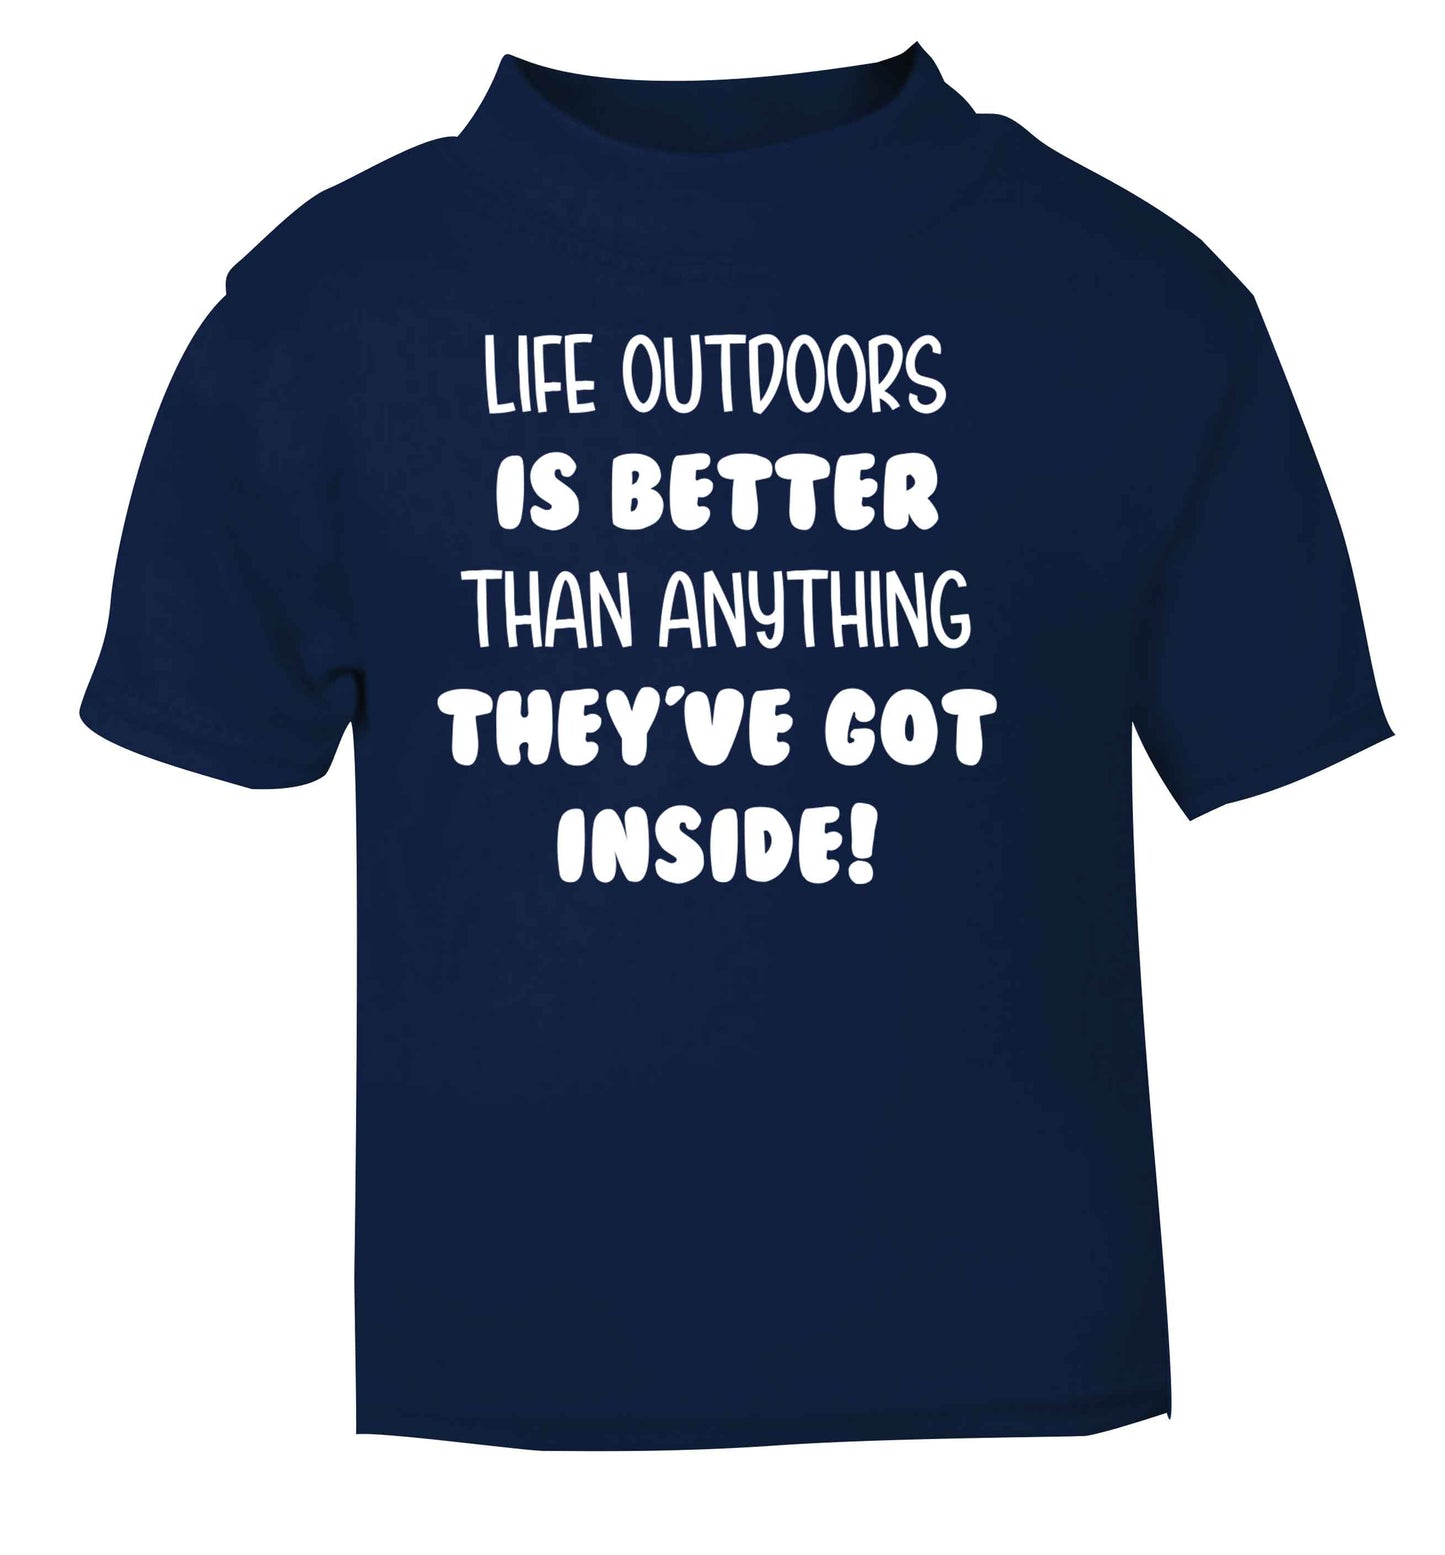 Life outdoors is better than anything they've go inside navy Baby Toddler Tshirt 2 Years